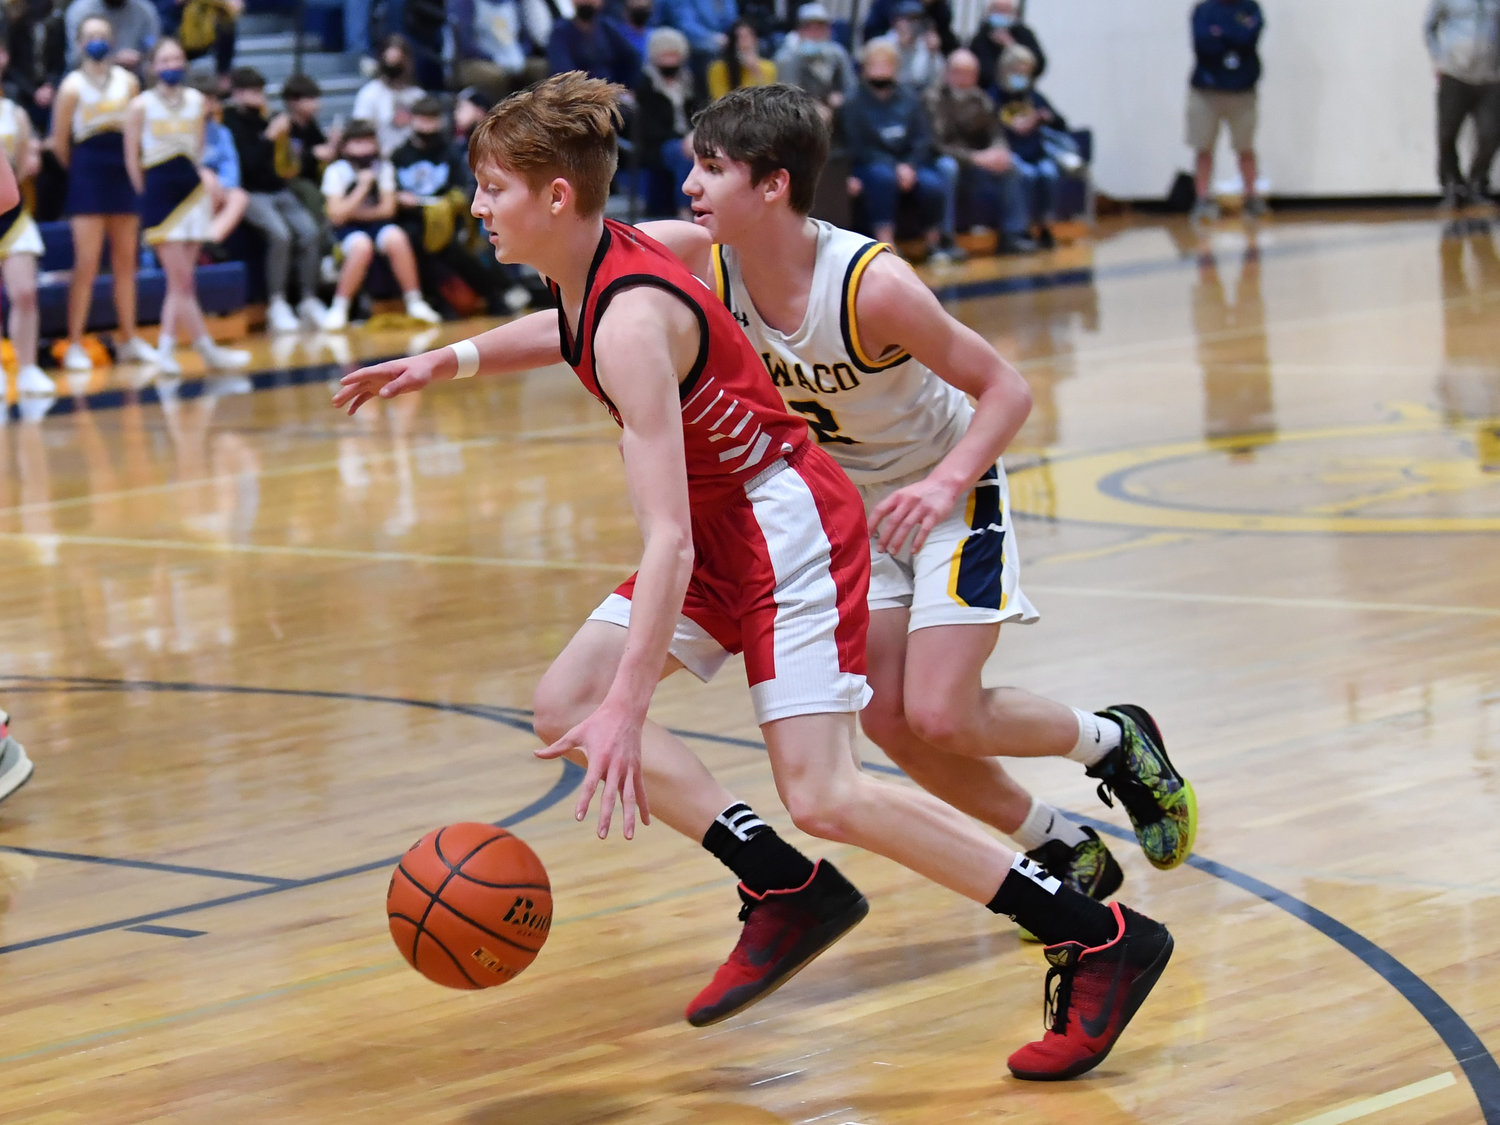 Toledo sophomore Jake Cournyer drives against Ilwaco during the first round of the district playoffs in Ilwaco on Feb. 5.